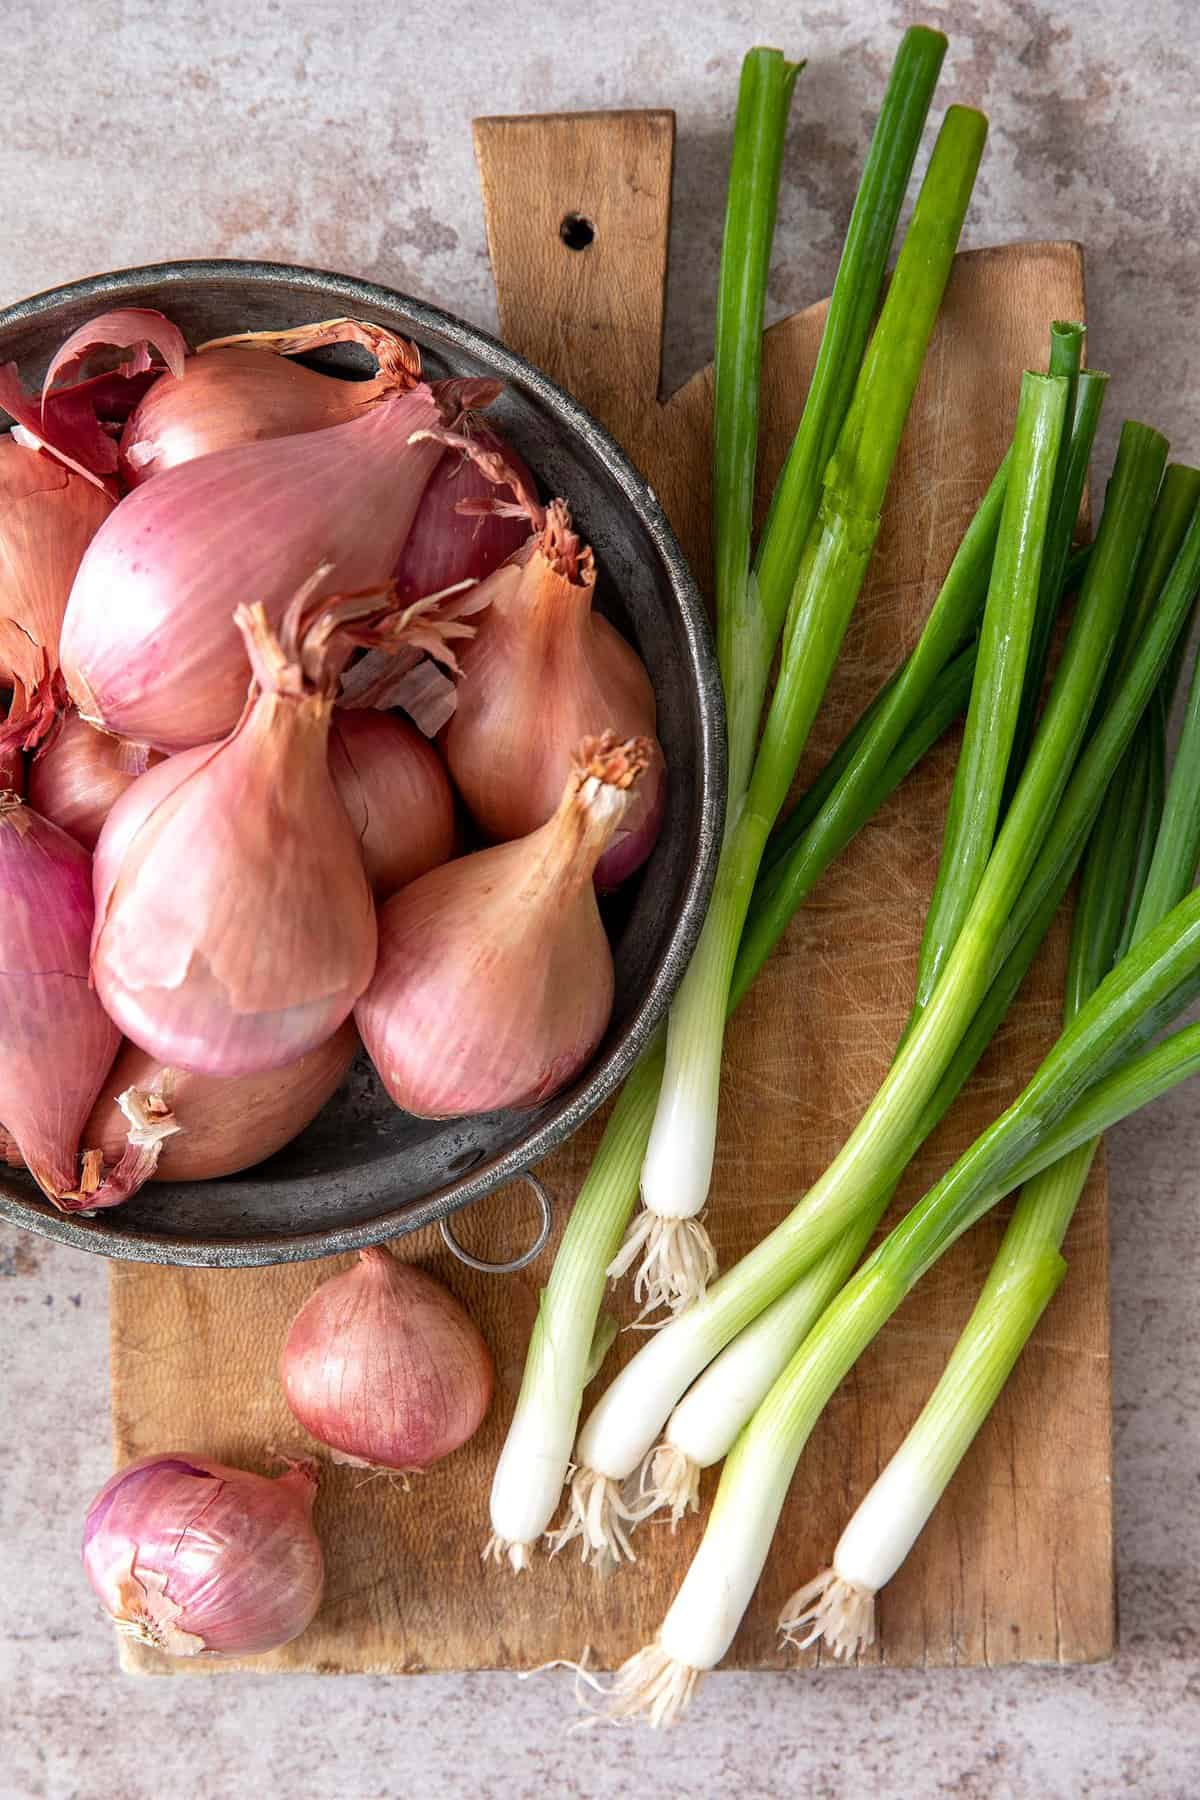 What Is the Difference Between Shallots and Onions? Learn How to